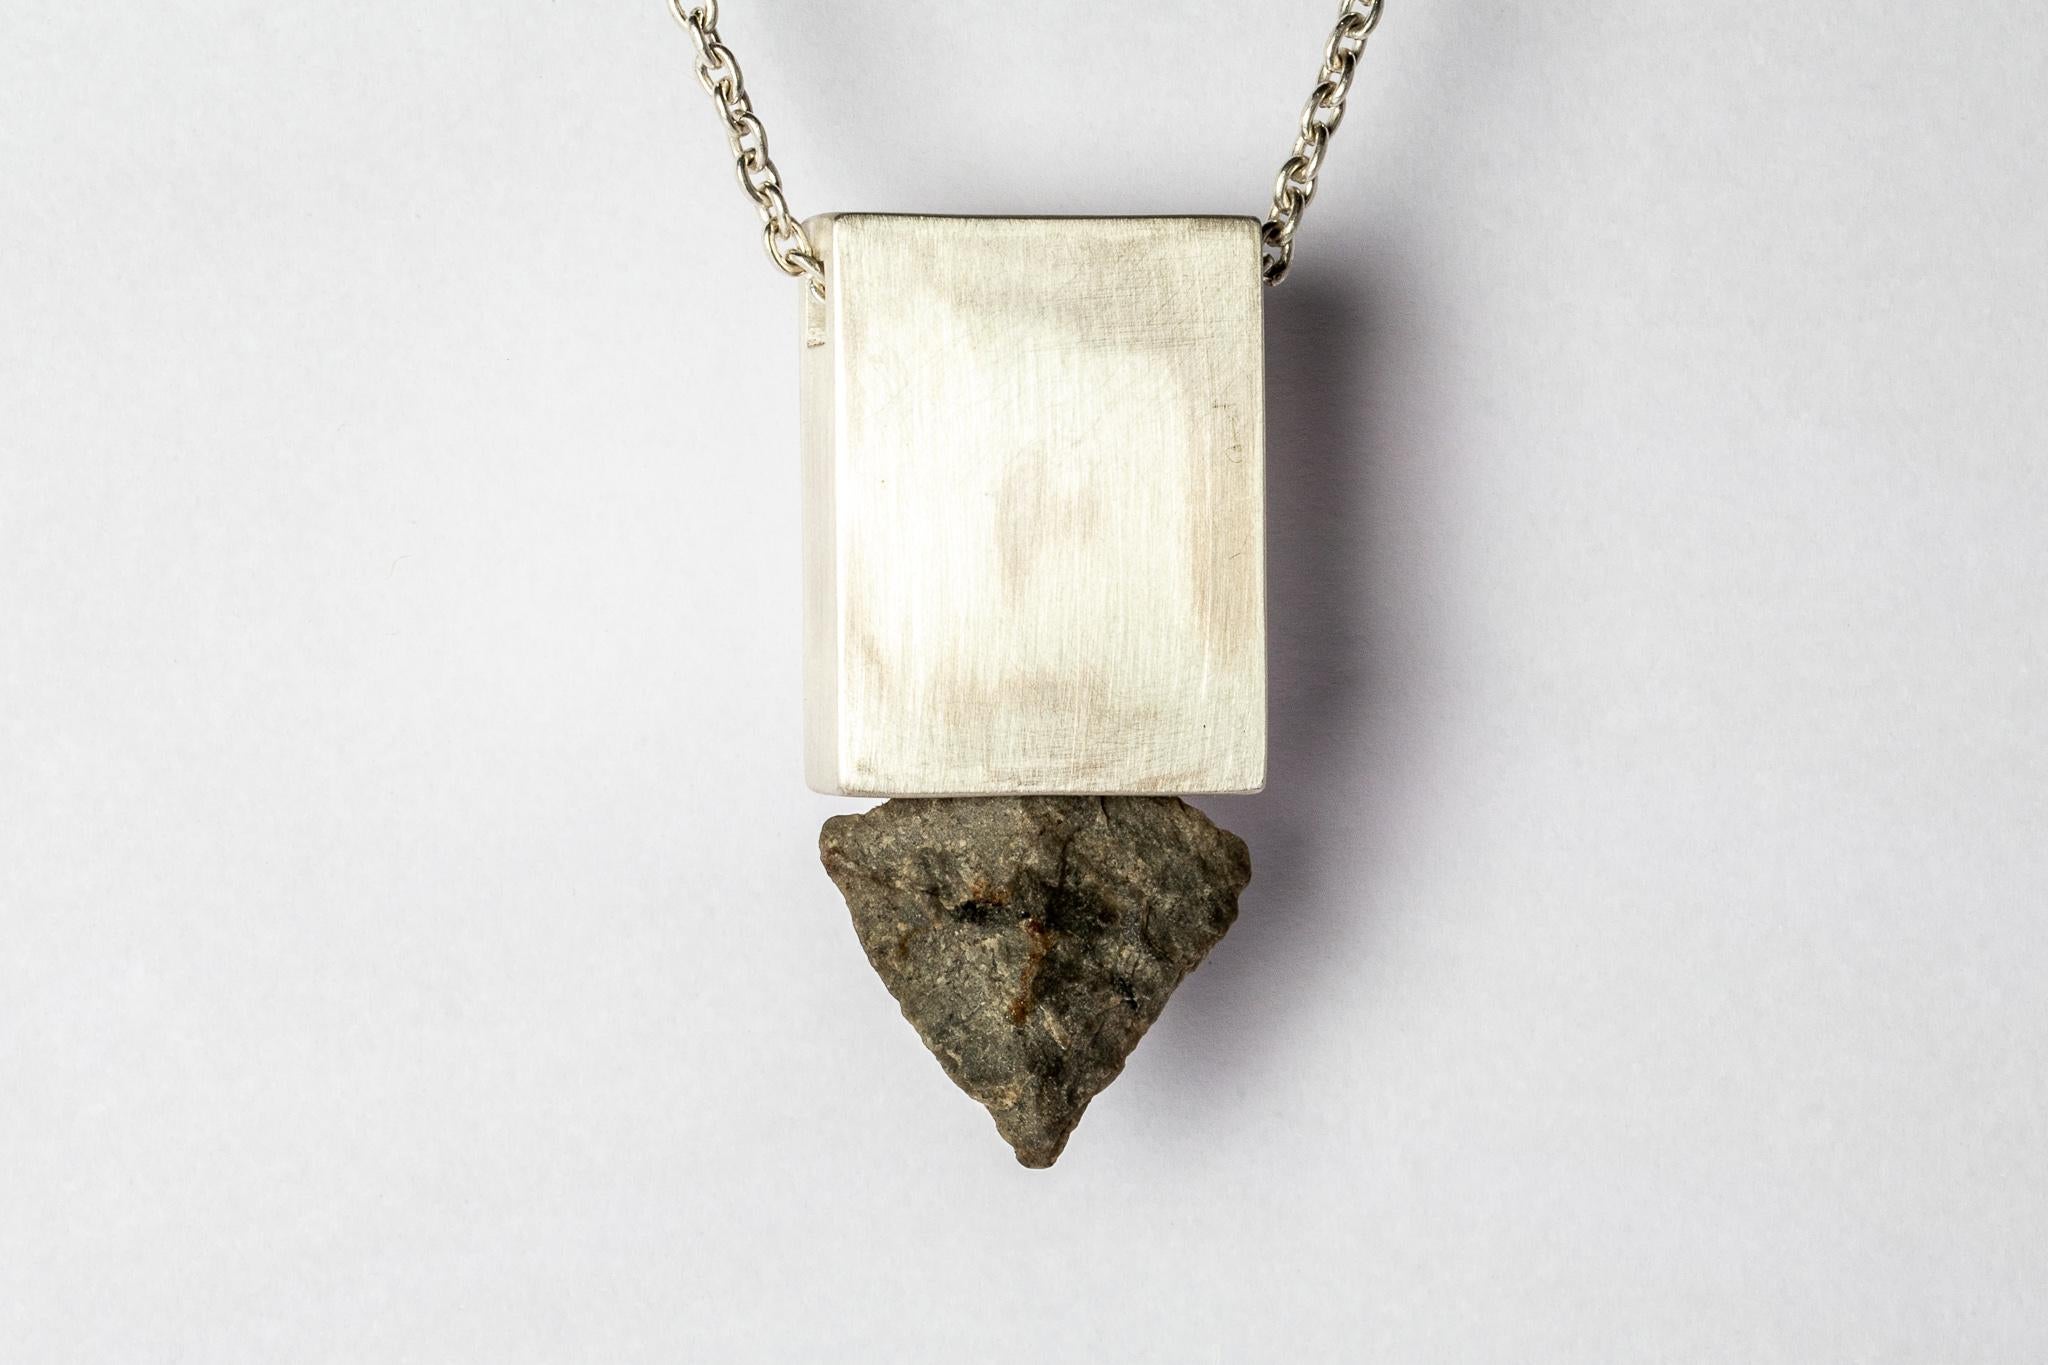 Necklace in the shape of cuboid made in matte sterling silver and a rough of arrowhead stone. These pieces are built using true arrowhead relics. Their wild history creates a depth and magic that is uniquely human. There are currently two design